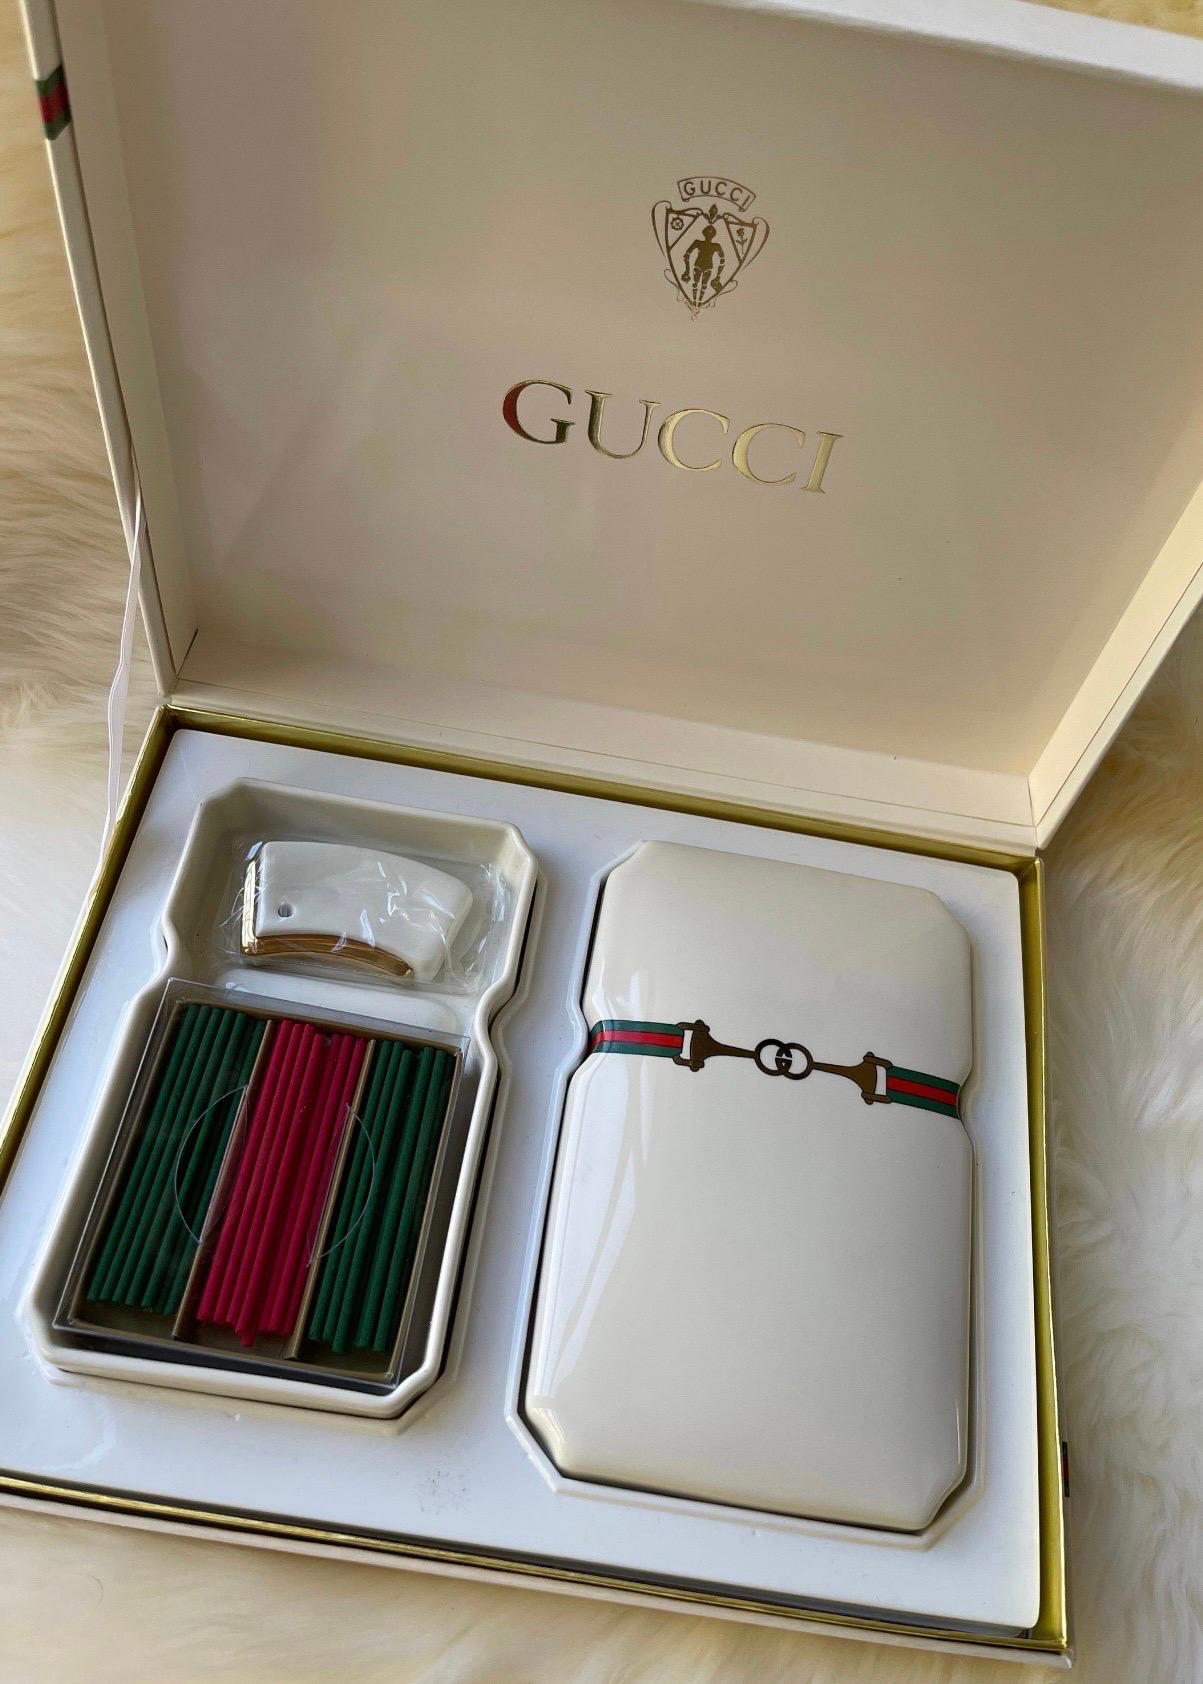 🖤RARE 1980’s Gucci🖤

Very chic Vintage GUCCI porcelain incense box with original packaging, incense sticks, and stand - all in excellent condition. 

This piece is a total conversation starter! So many uses! Can be used as a candy dish, trinket